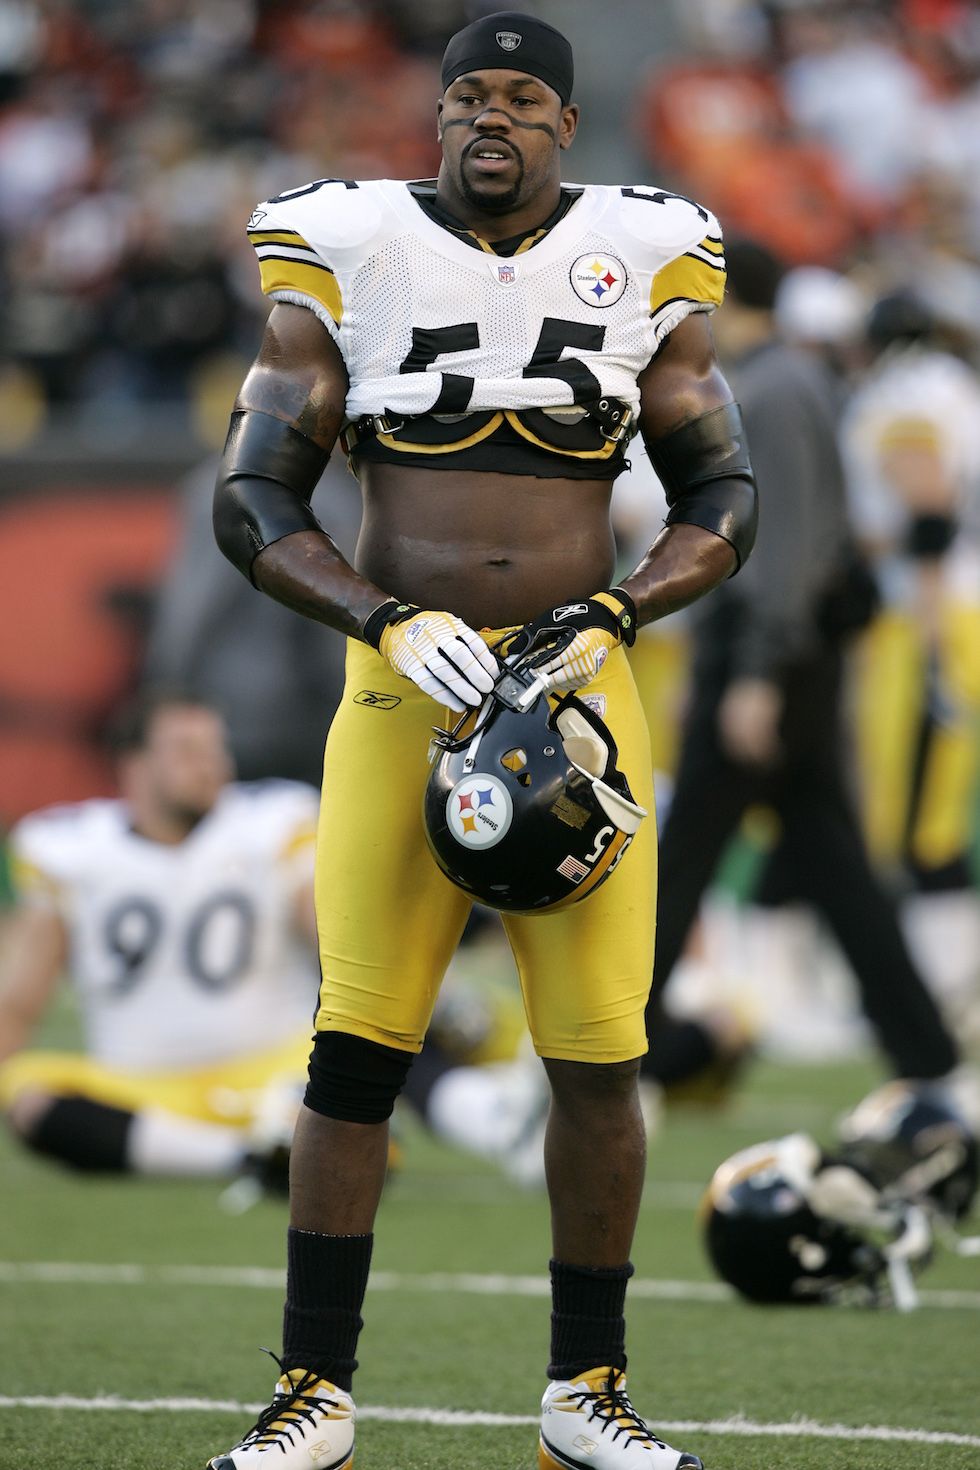 steelers uniforms through the years